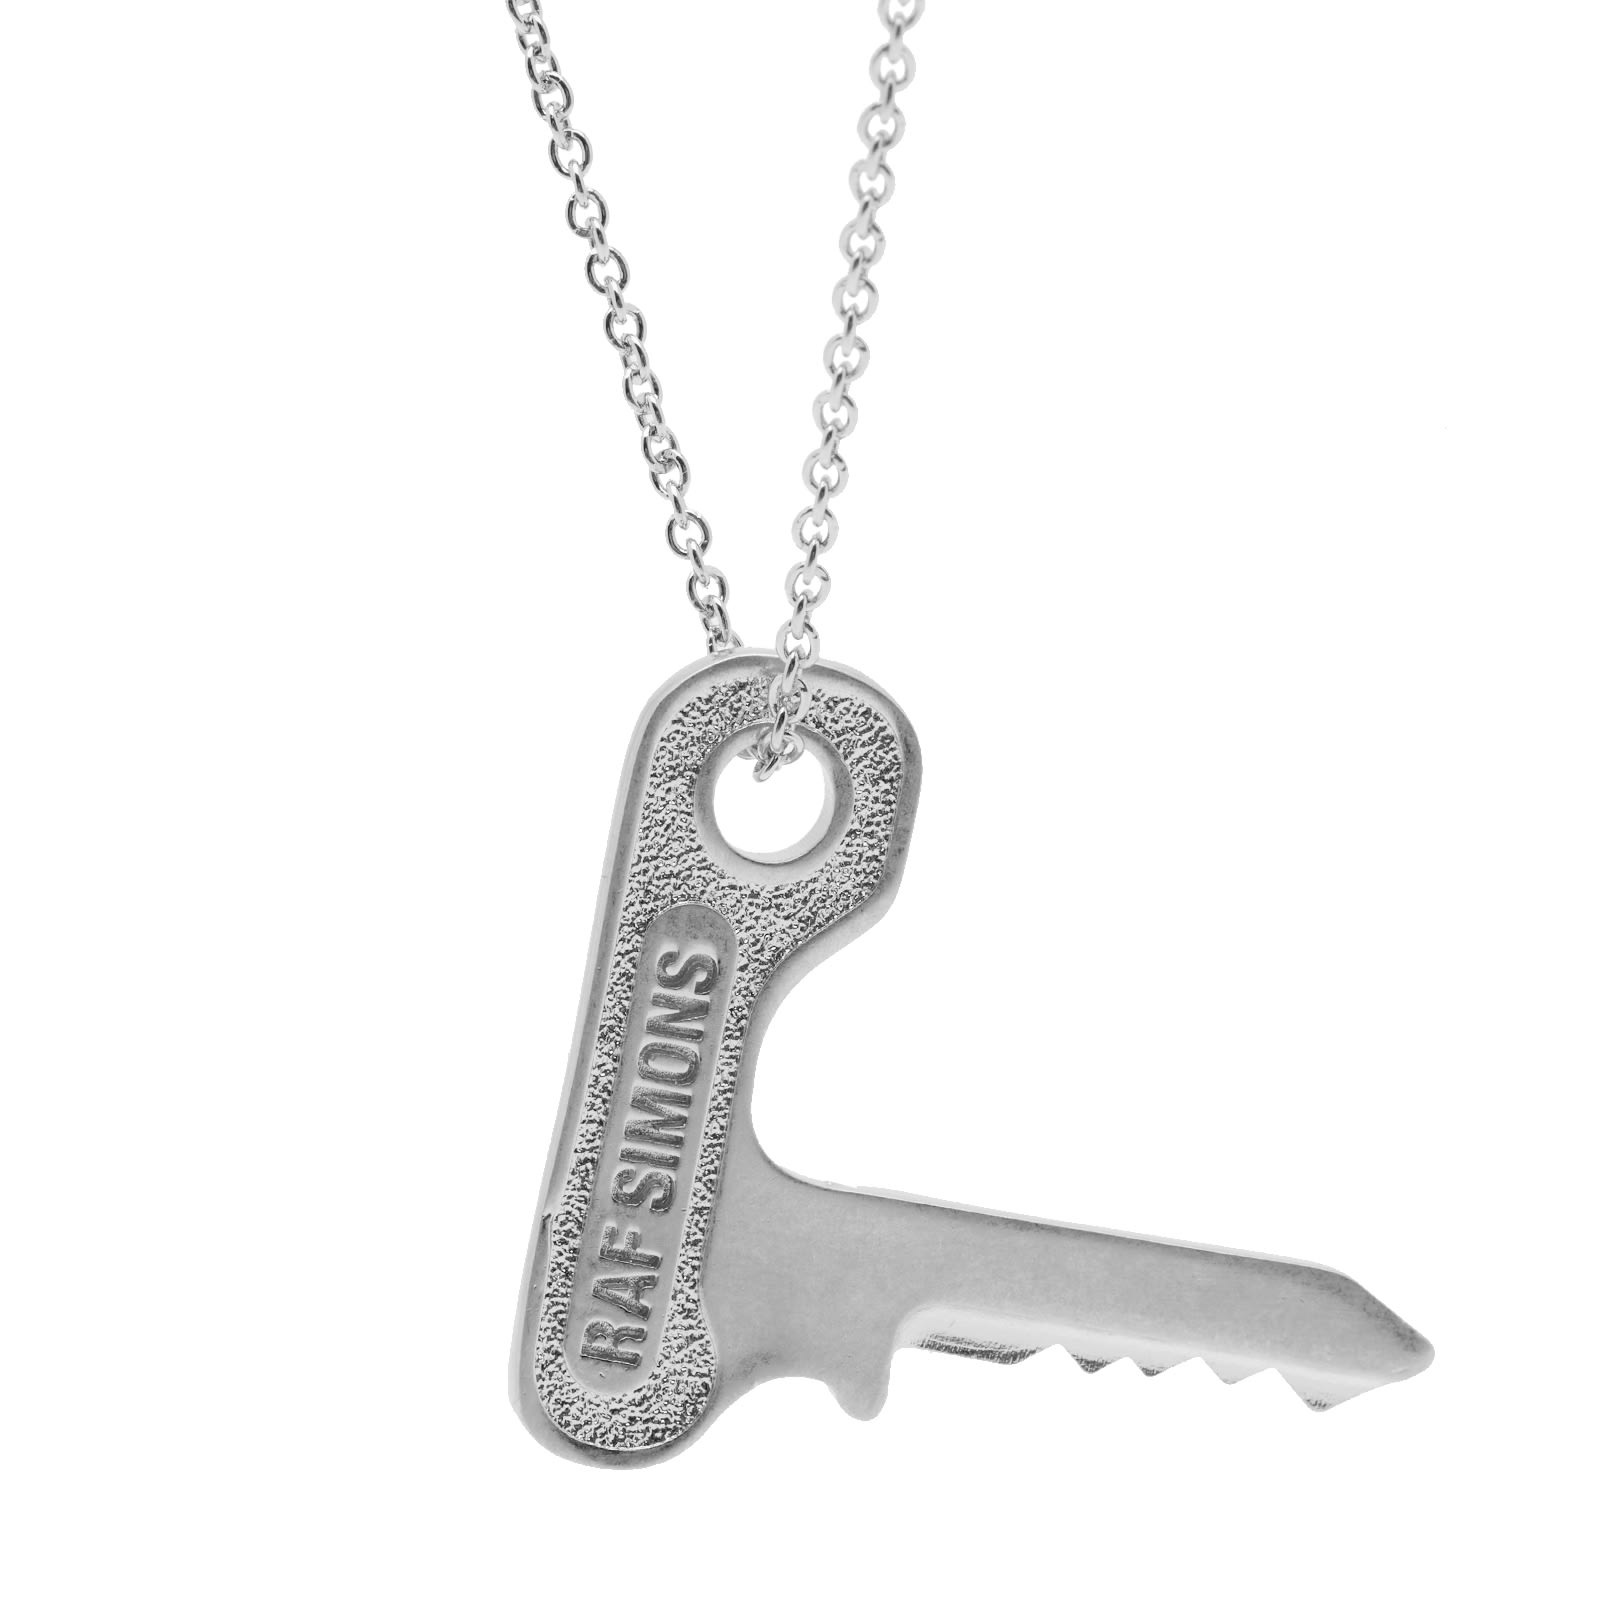 Raf Simons Small Key On Hanger Necklace - 3